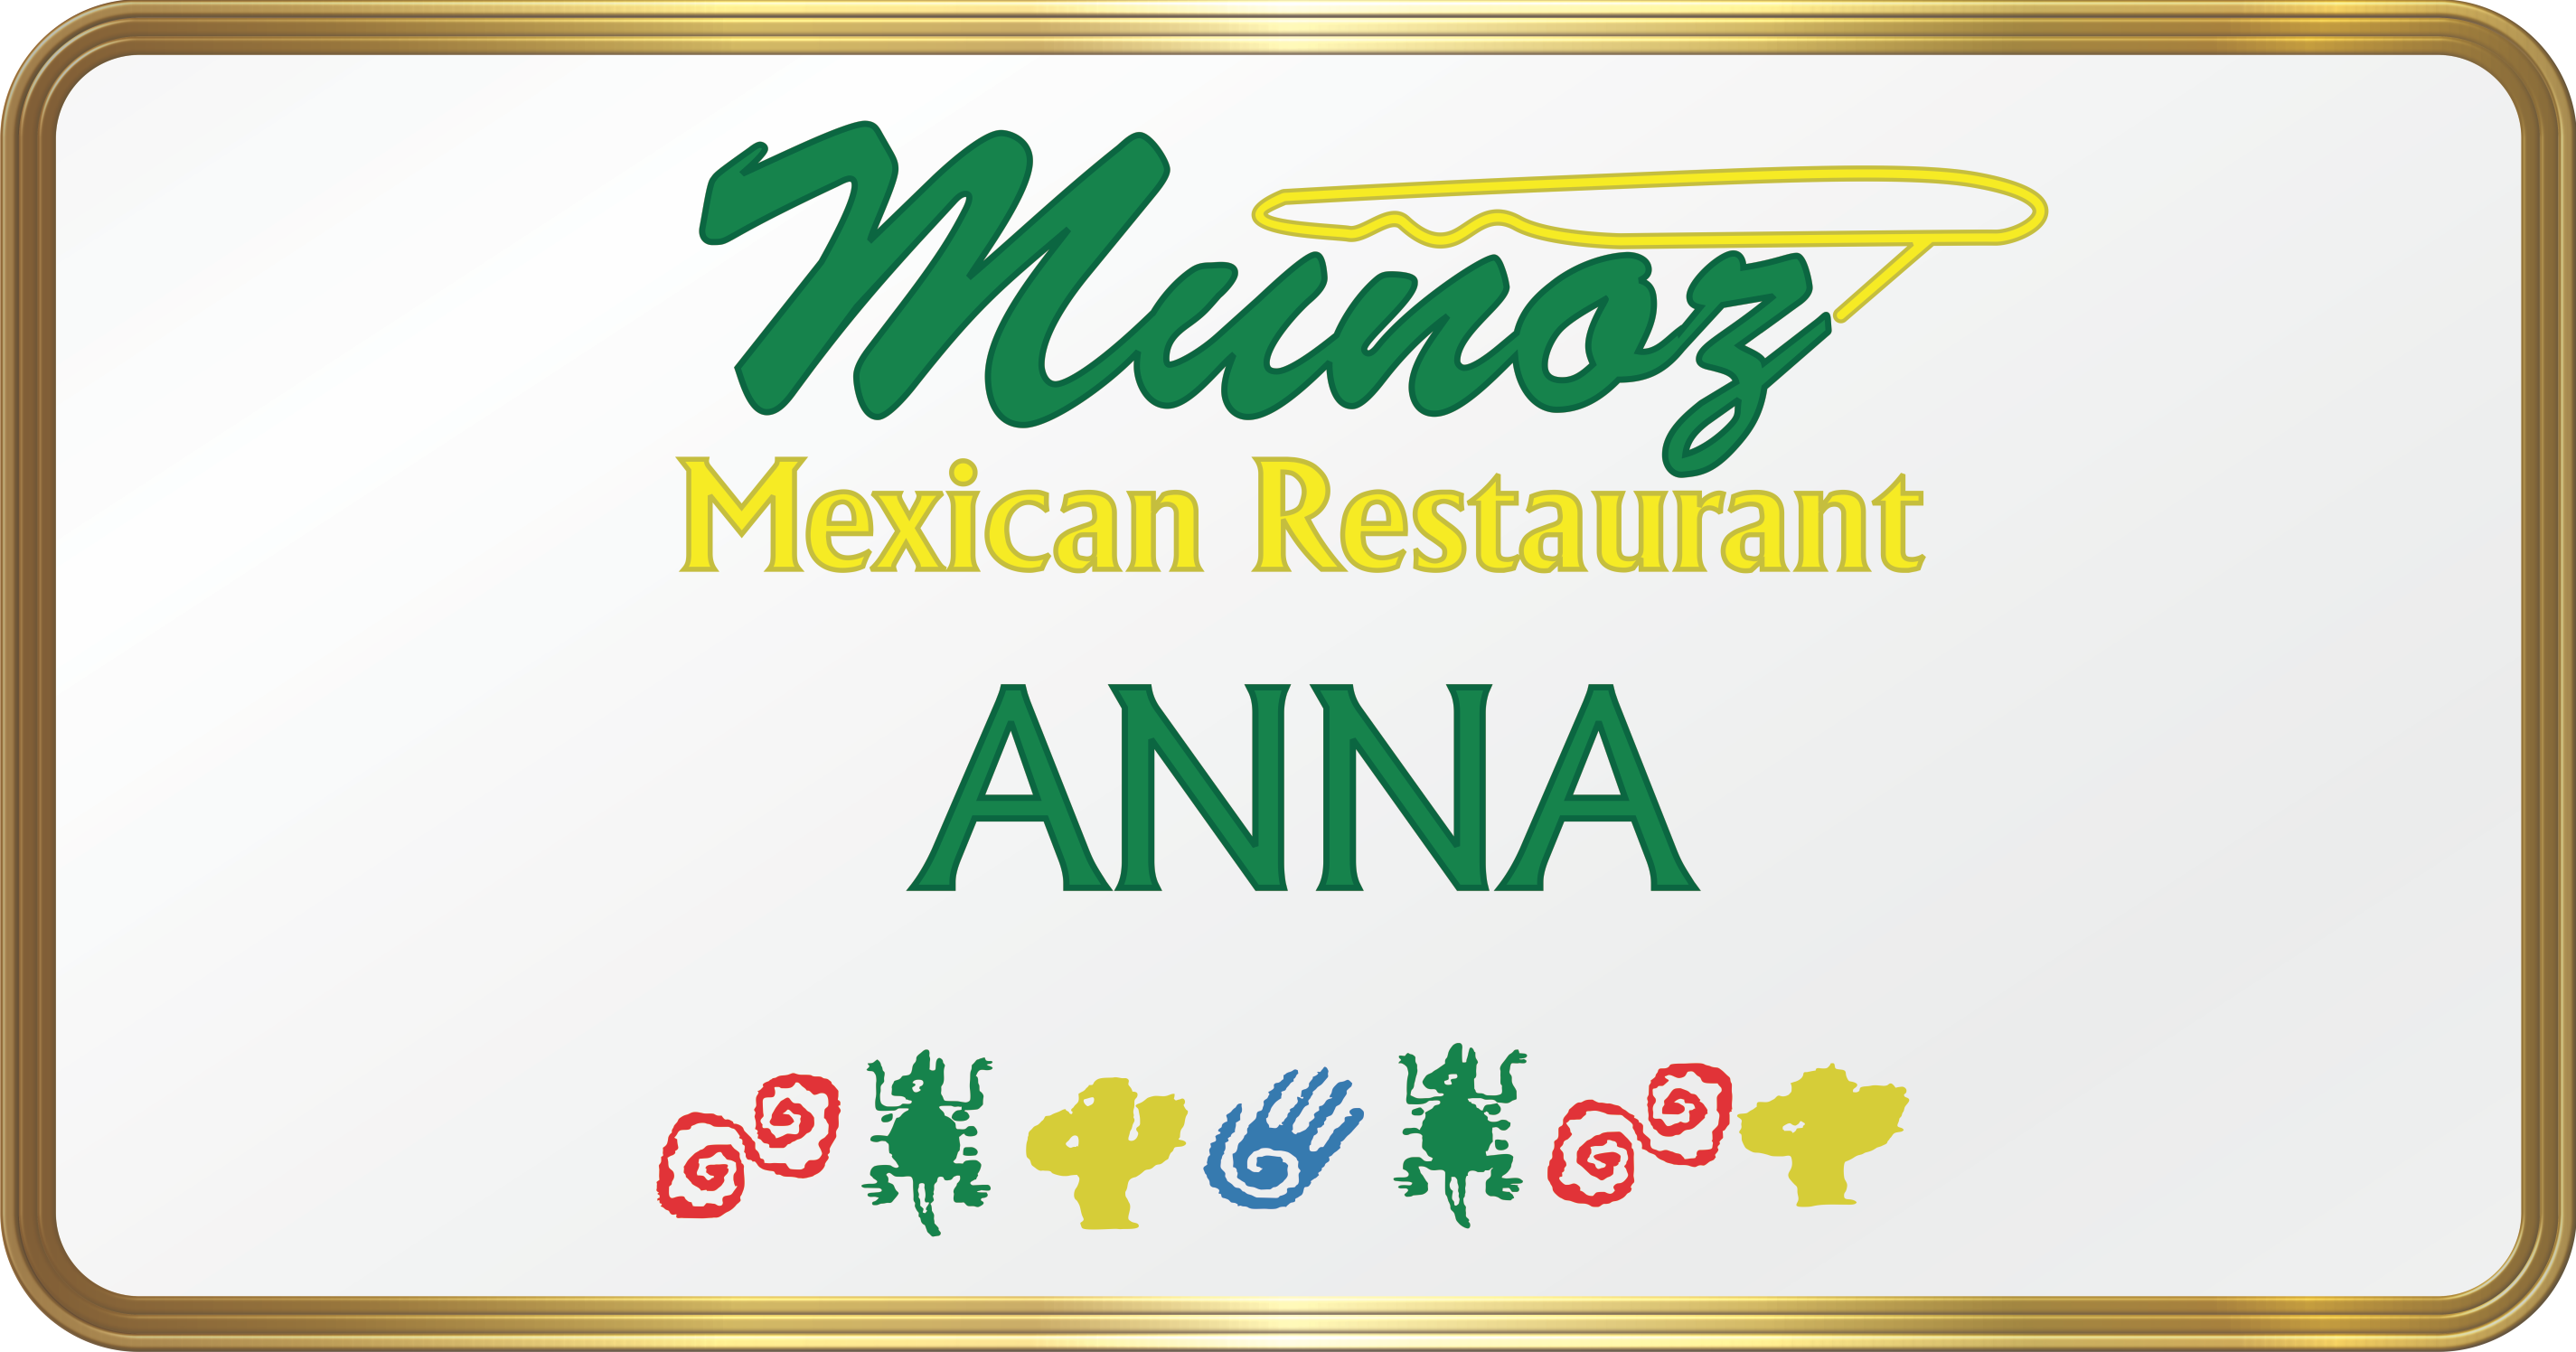 An employee badge for Munoz Mexican Restaurant rendered in multiple colors